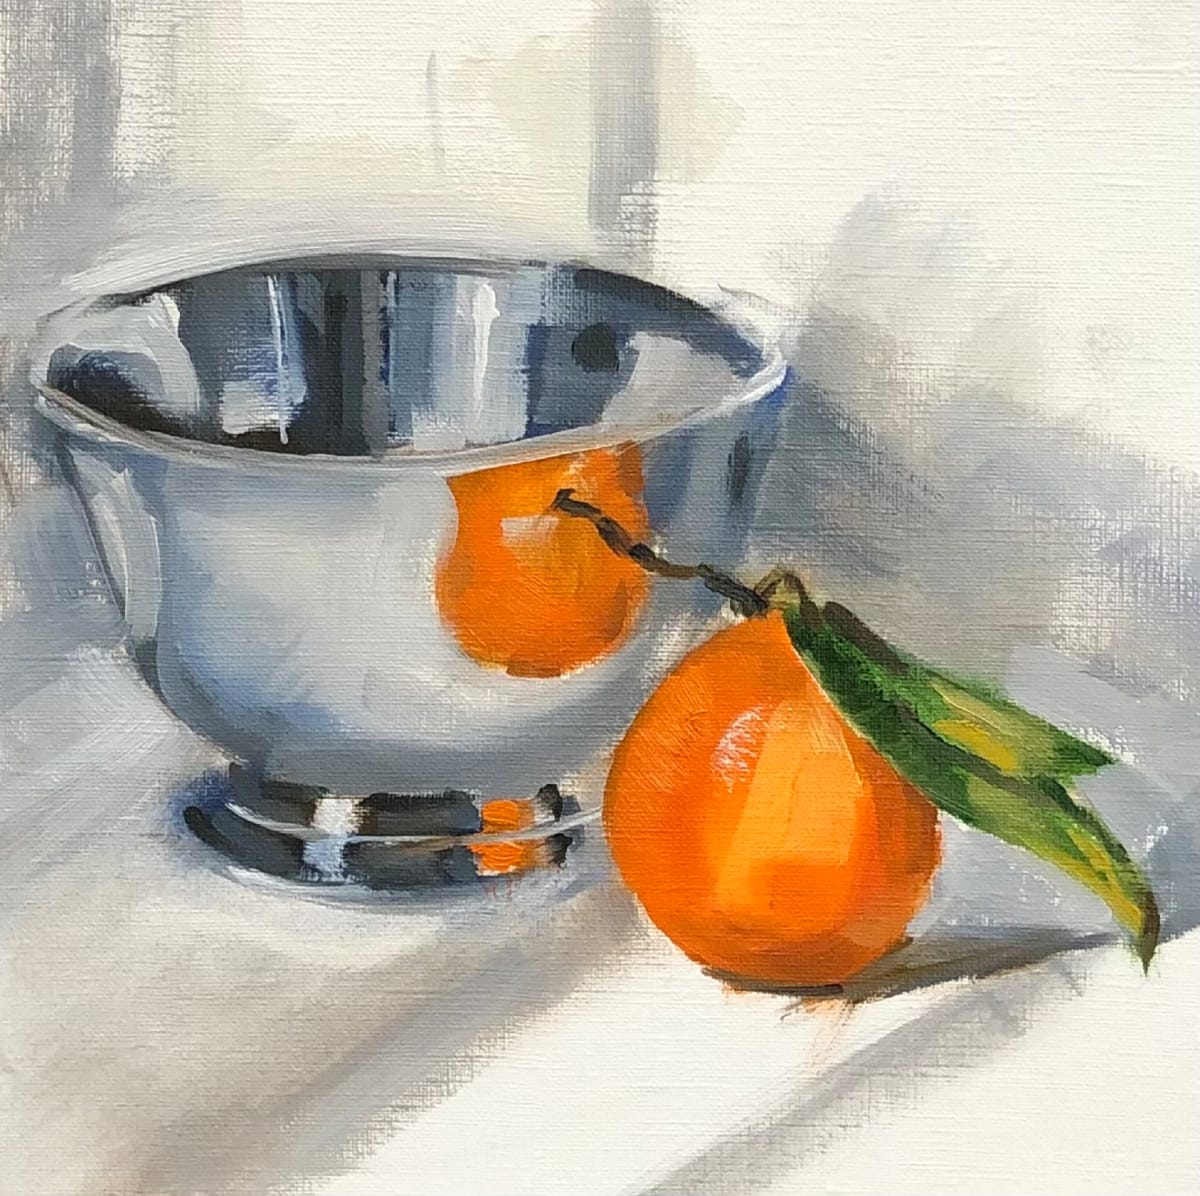 Silver with Orange by Cary Galbraith  Image: A sterling silver bowl beside a tangelo with stem and leaf still attached. The orange is reflected in the bowl 